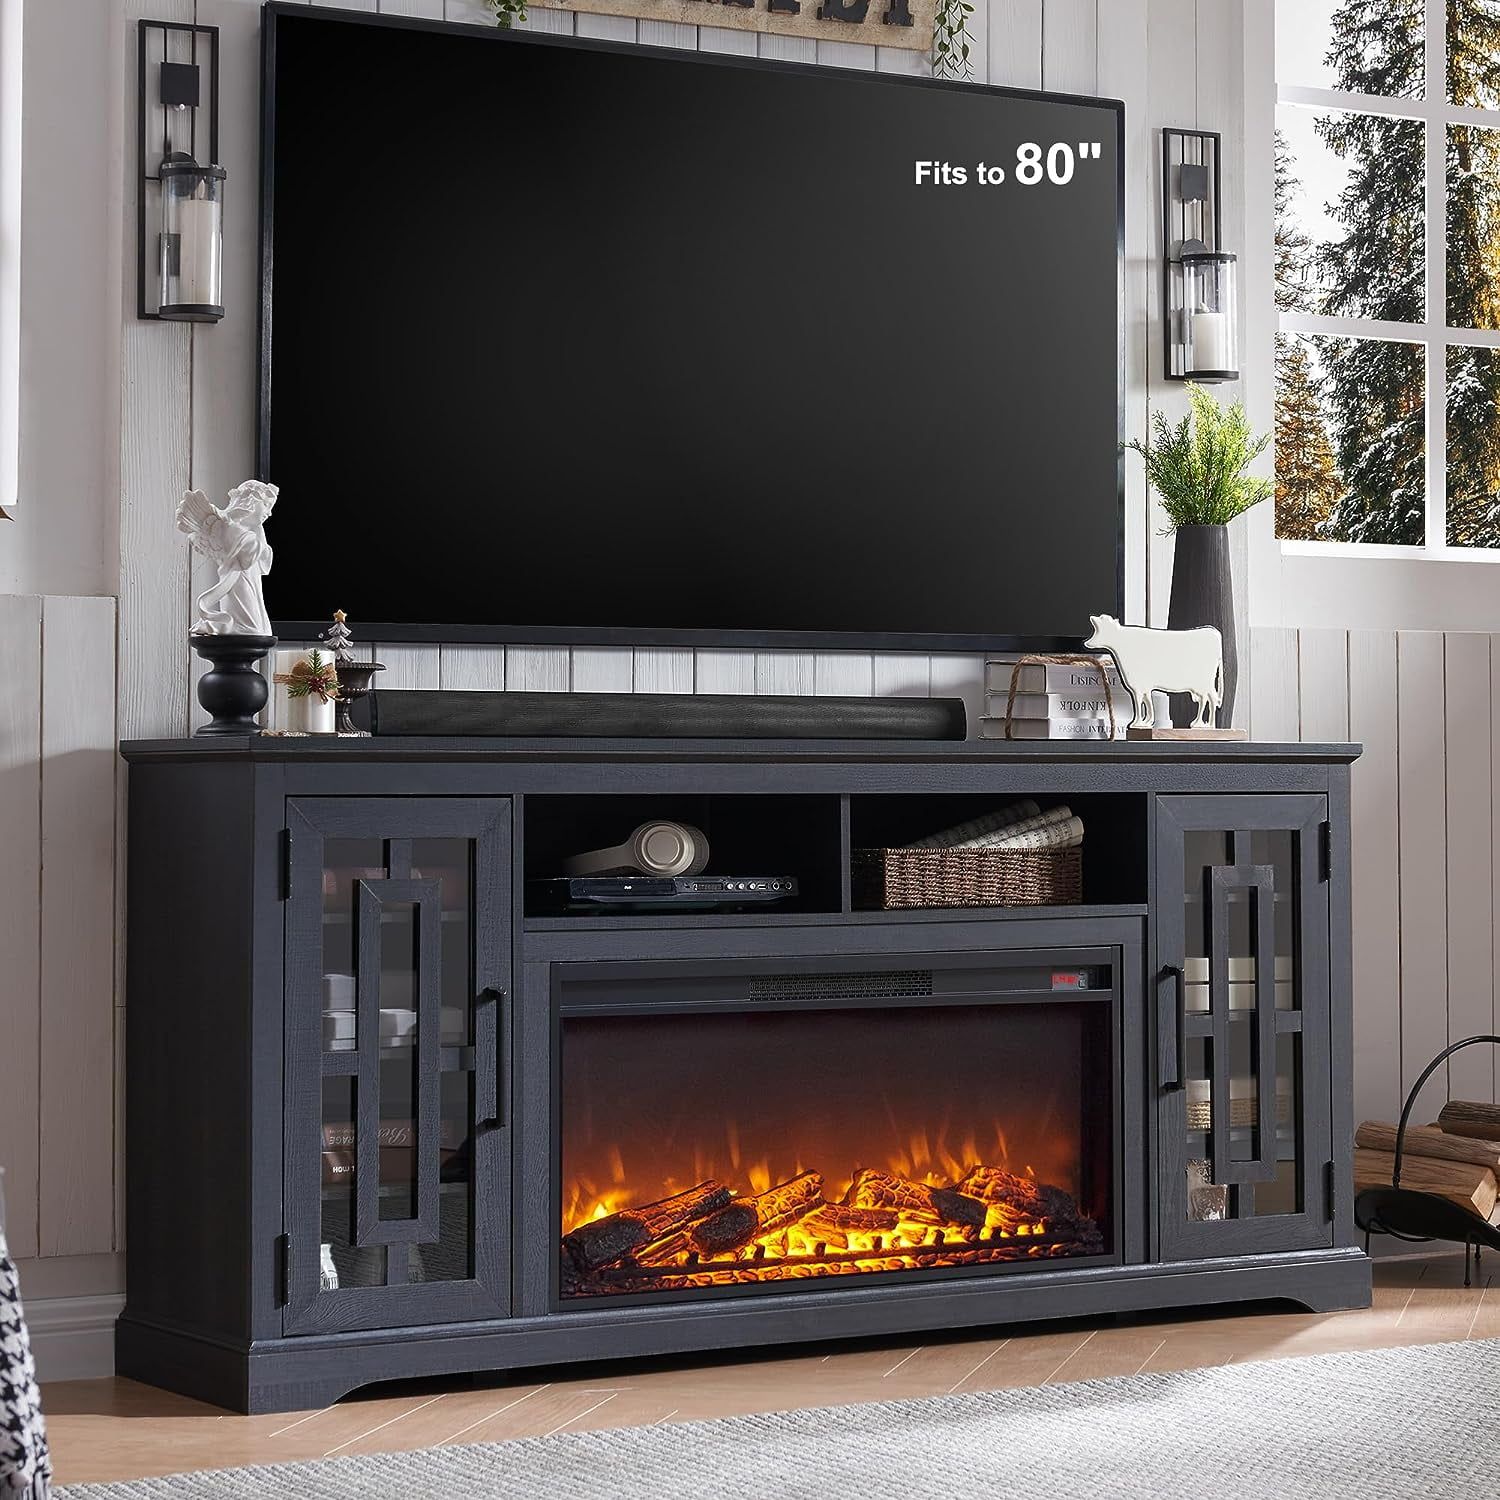 T4Tream 70" Fireplace Tv Stand For 75 80 Inch Tv, Farmhouse Highboy  Entertainment Center For Living Room, Black – Walmart Pertaining To Wood Highboy Fireplace Tv Stands (Photo 1 of 15)